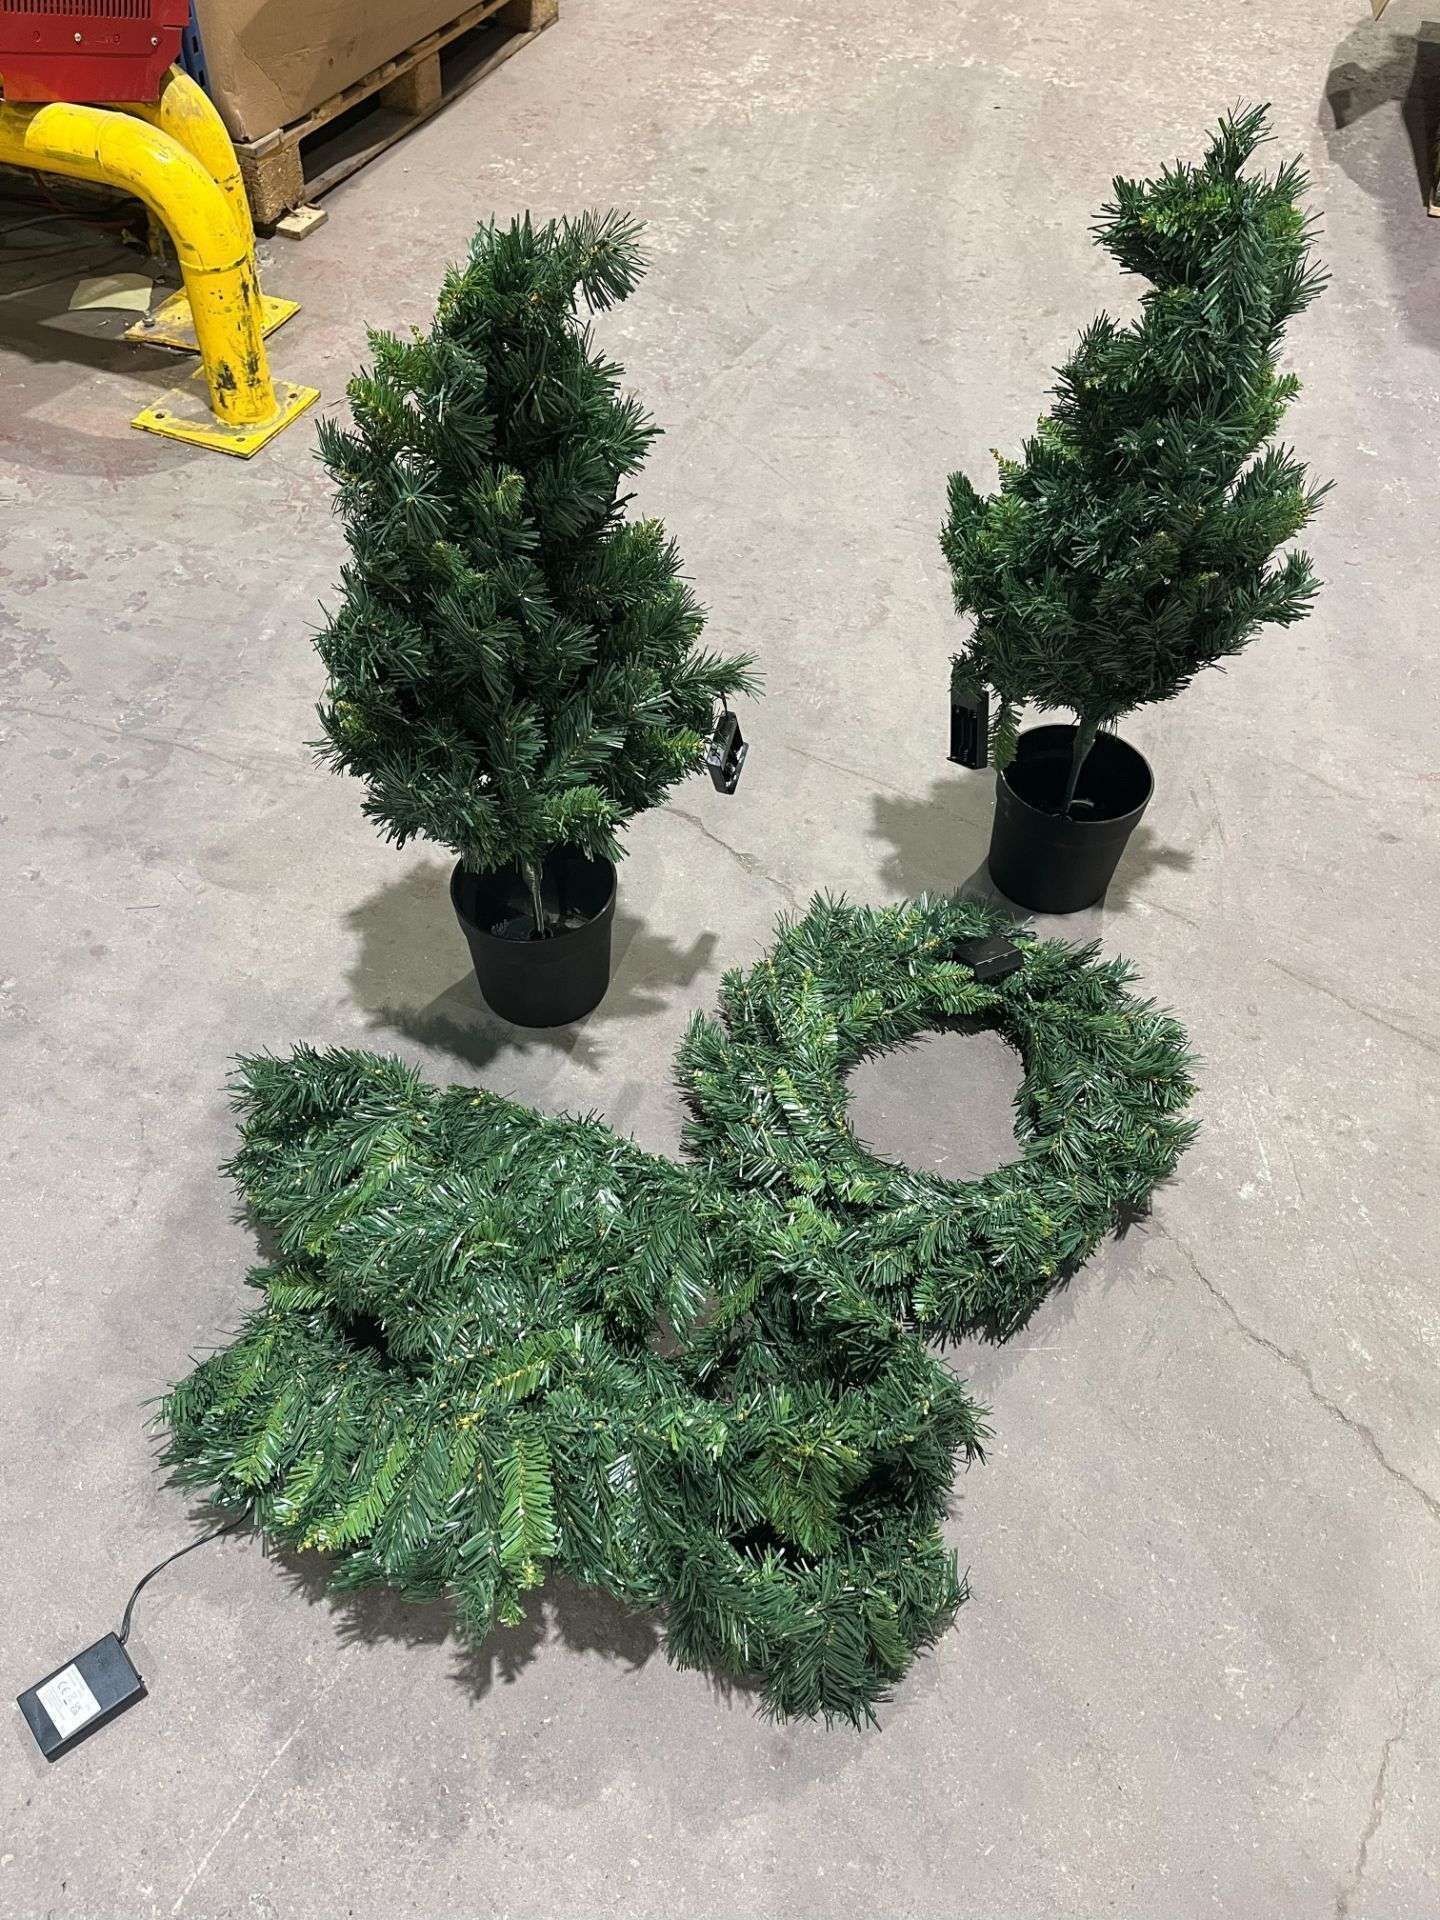 BRAND NEW CHRISTMAS DOOR SETS INCLDUNG 2 X POTTED TREES AND 2 BRANCH CONNECTORS RRP £129 R15